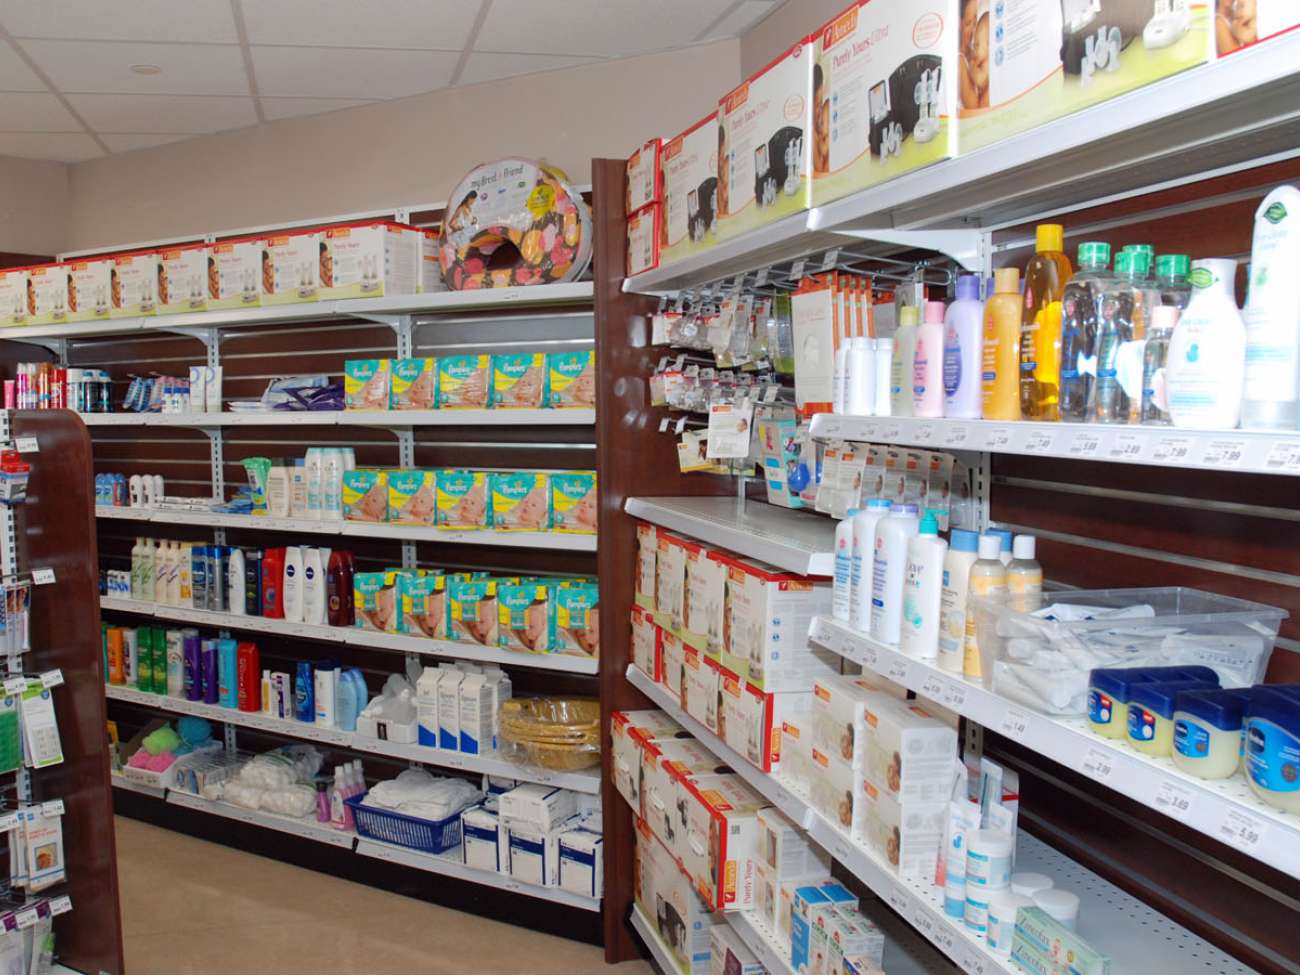 4,100 babies are born at GRH every year. So the renovated pharmacy includes a much larger baby care section.